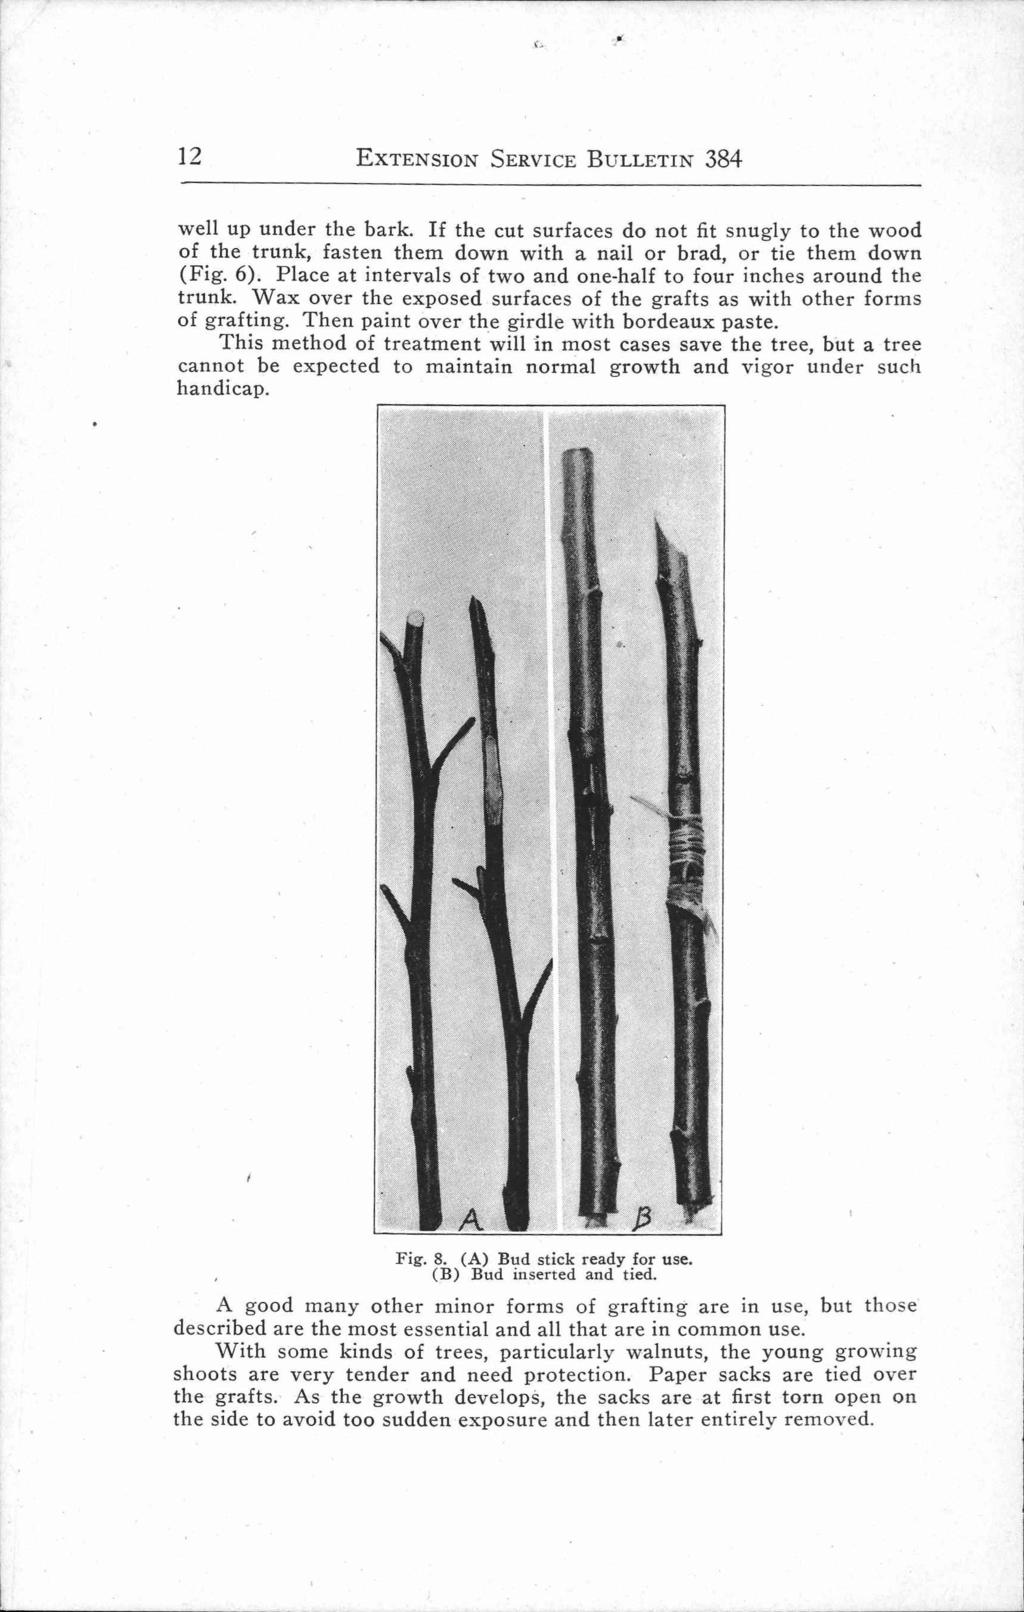 12 EXTENSION SERVICE BULLETIN 384 well up under the bark. If the cut surfaces do not fit snugly to the wood of the trunk, fasten them down with a nail or brad, or tie them down (Fig. 6).